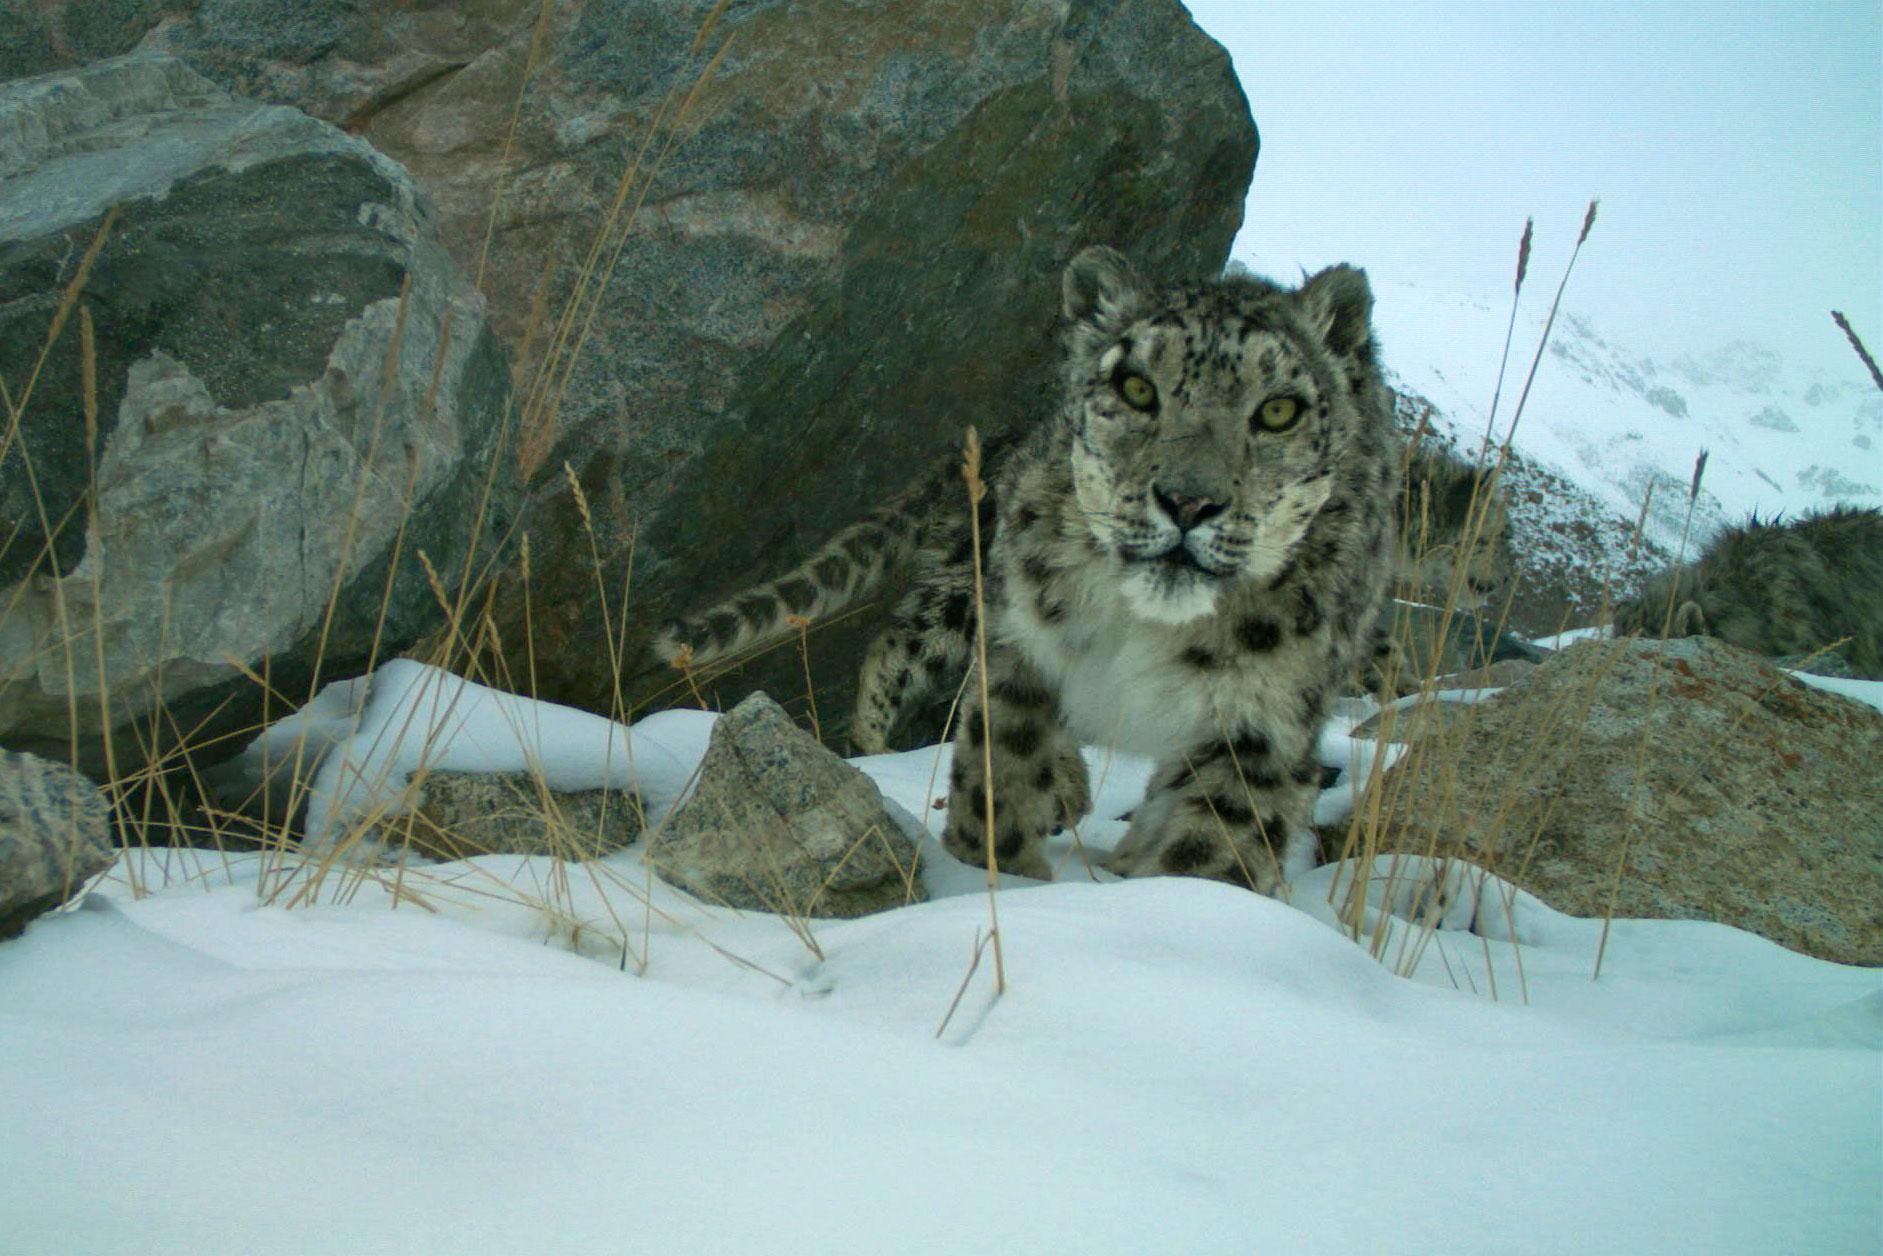 A snow leopard in the wild.